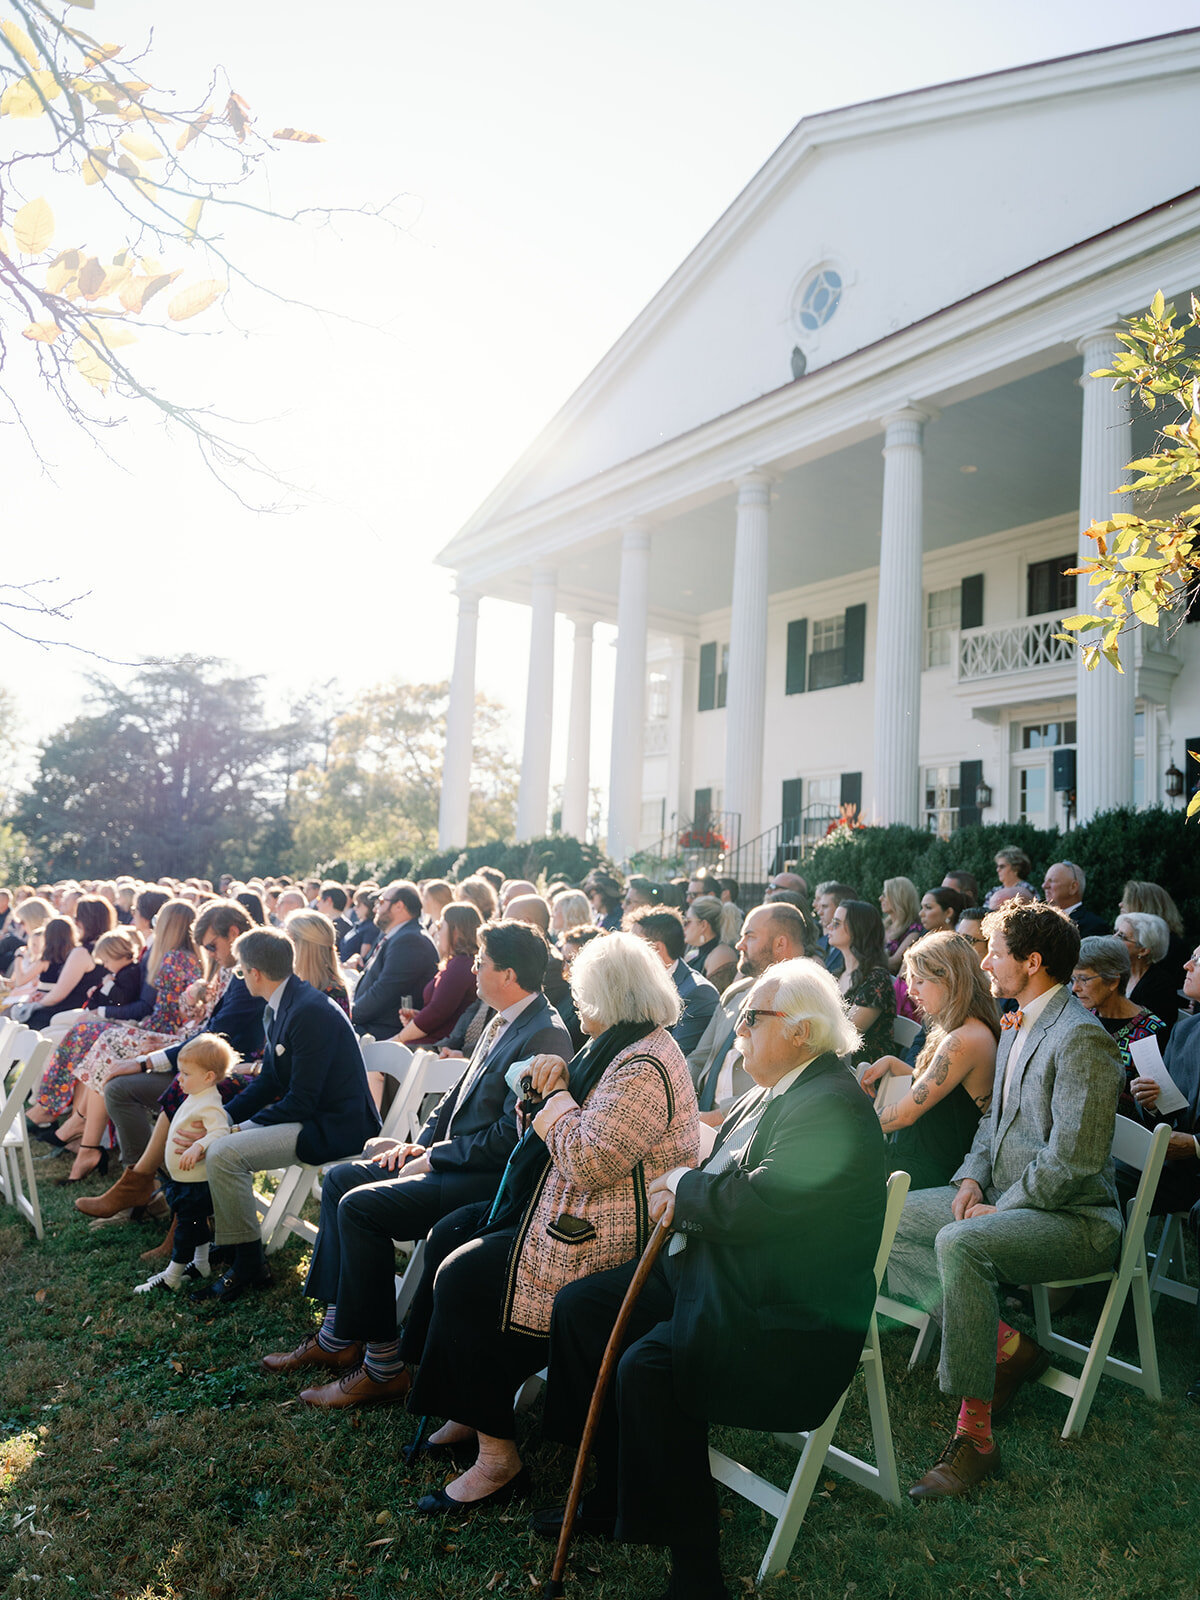 Wedding ceremony with guests on lawn of rosemont manor